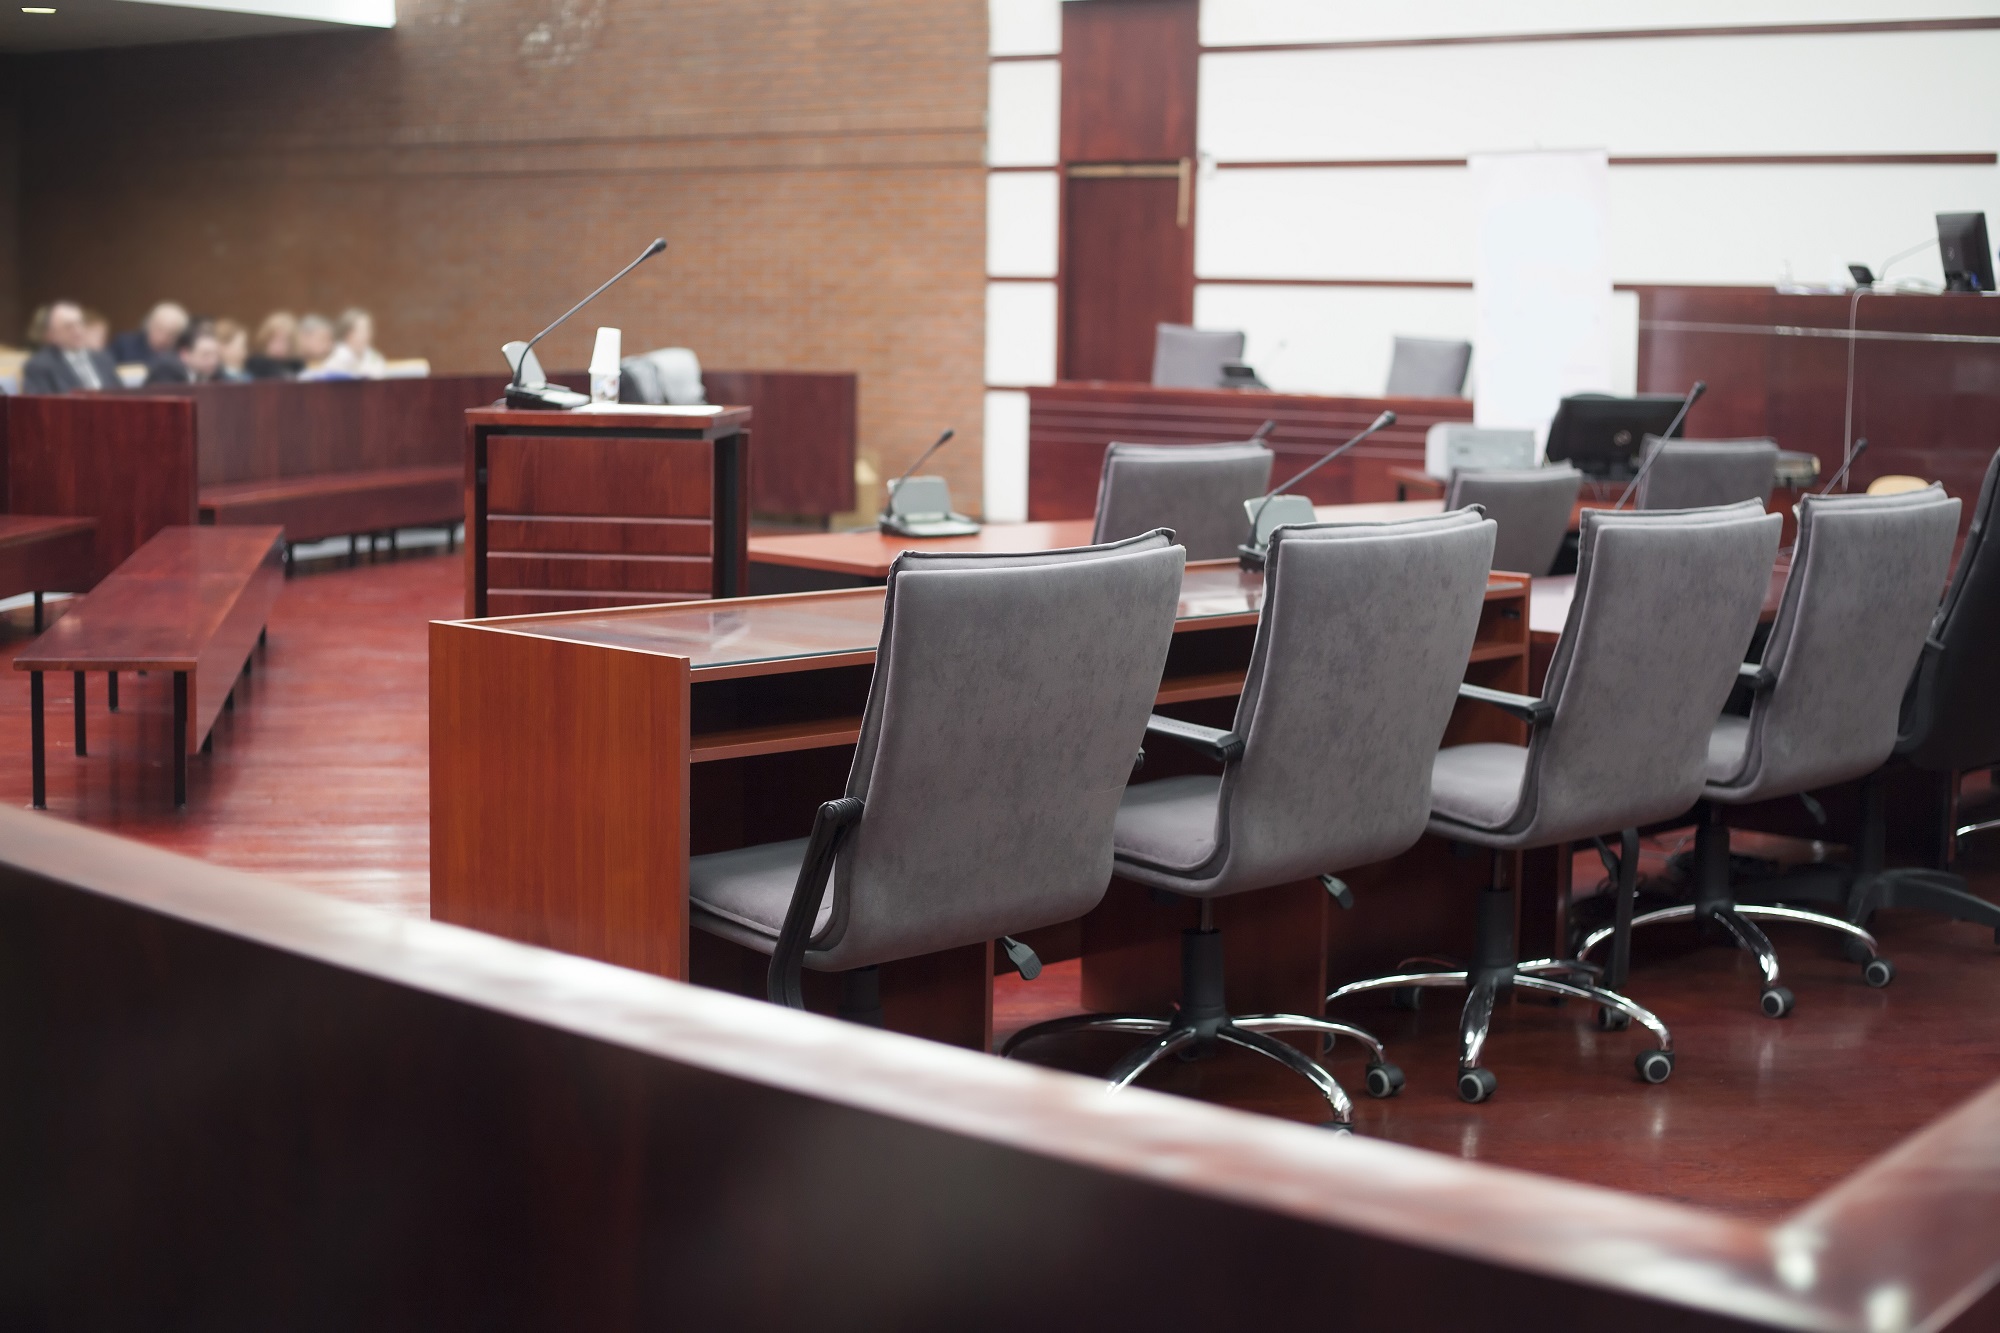 A stock photo of a mostly empty courtroom with some spectators in the background